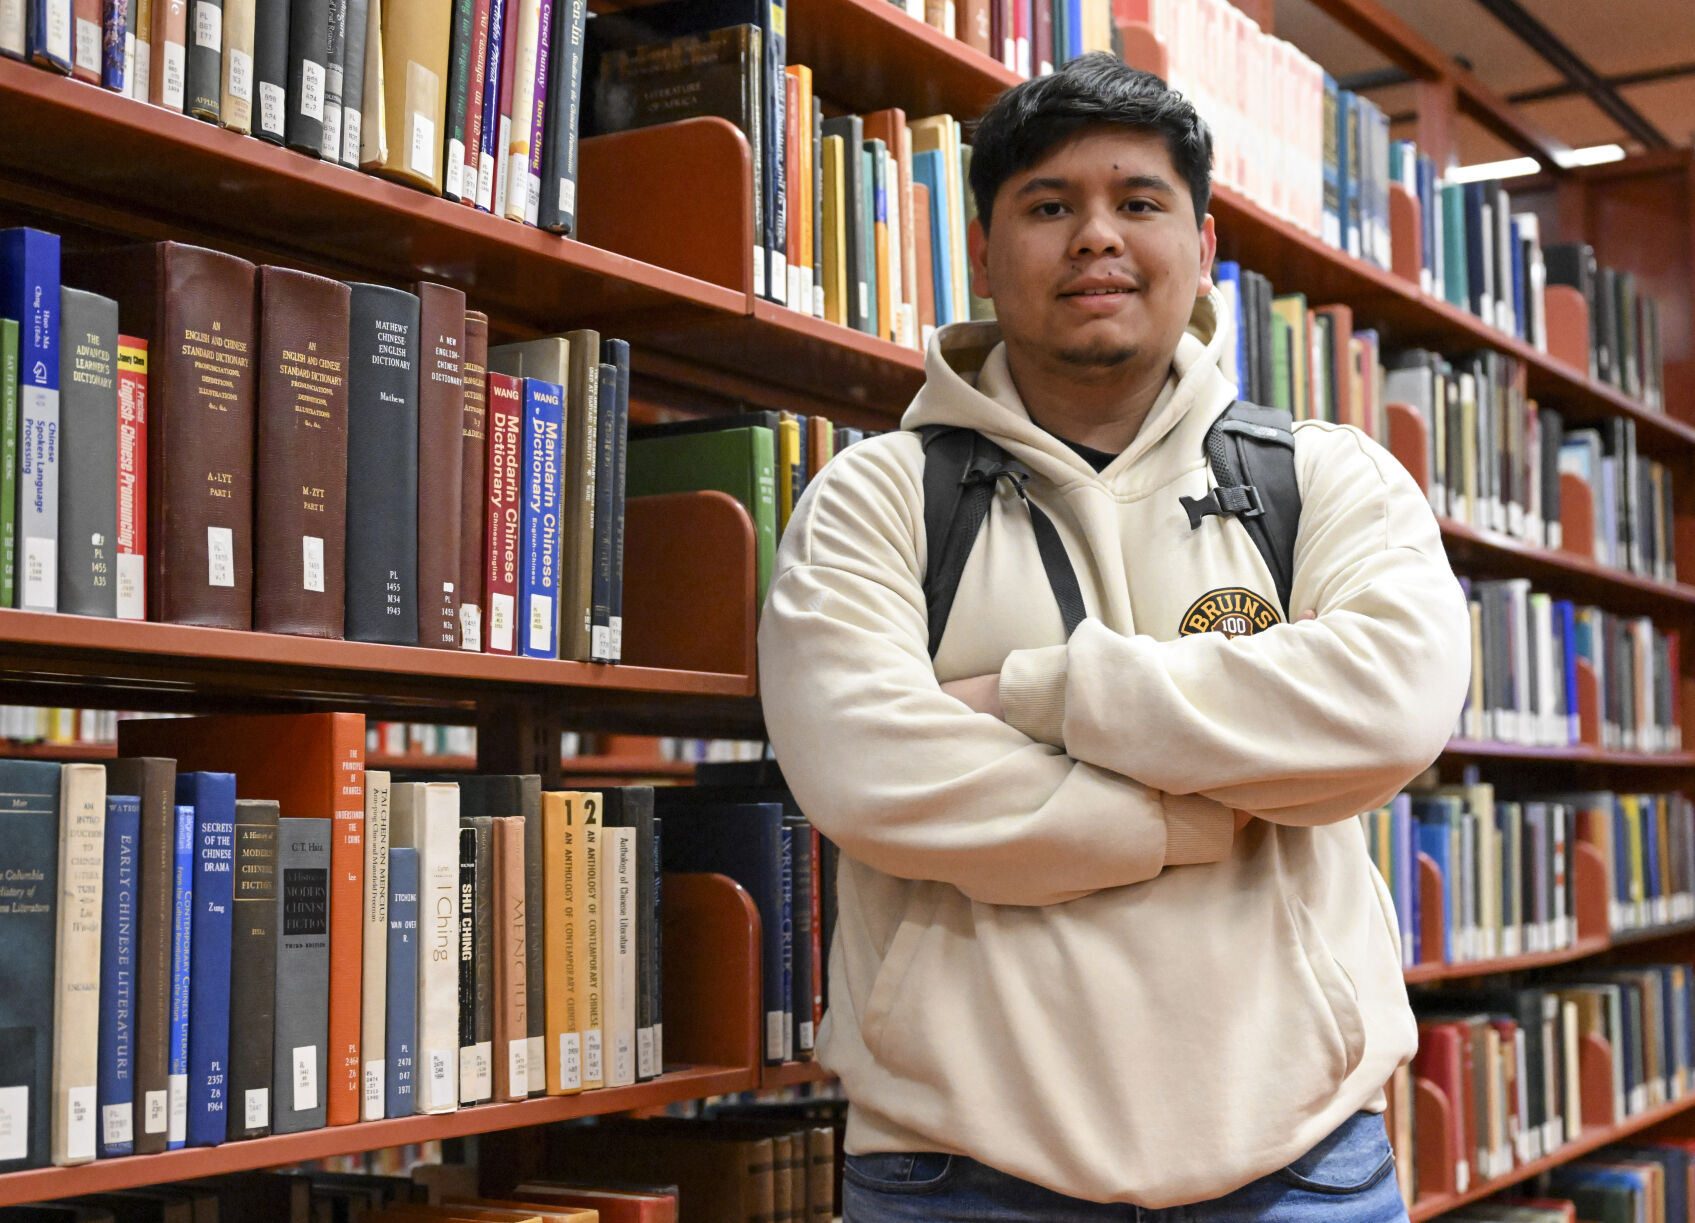 <p>Jesus Noyola, a sophomore attending Rensselaer Polytechnic Institute, poses for a portrait in the Folsom Library, Tuesday, Feb. 13, 2024, in Troy, N.Y. A later-than-expected rollout of a revised Free Application for Federal Student Aid, or FASFA, that schools use to compute financial aid, is resulting in students and their parents putting off college decisions. Noyola said he hasn’t been able to submit his FAFSA because of an error in the parent portion of the application. “It’s disappointing and so stressful since all these issues are taking forever to be resolved,” said Noyola, who receives grants and work-study to fund his education. (AP Photo/Hans Pennink)</p>   PHOTO CREDIT: Hans Pennink 